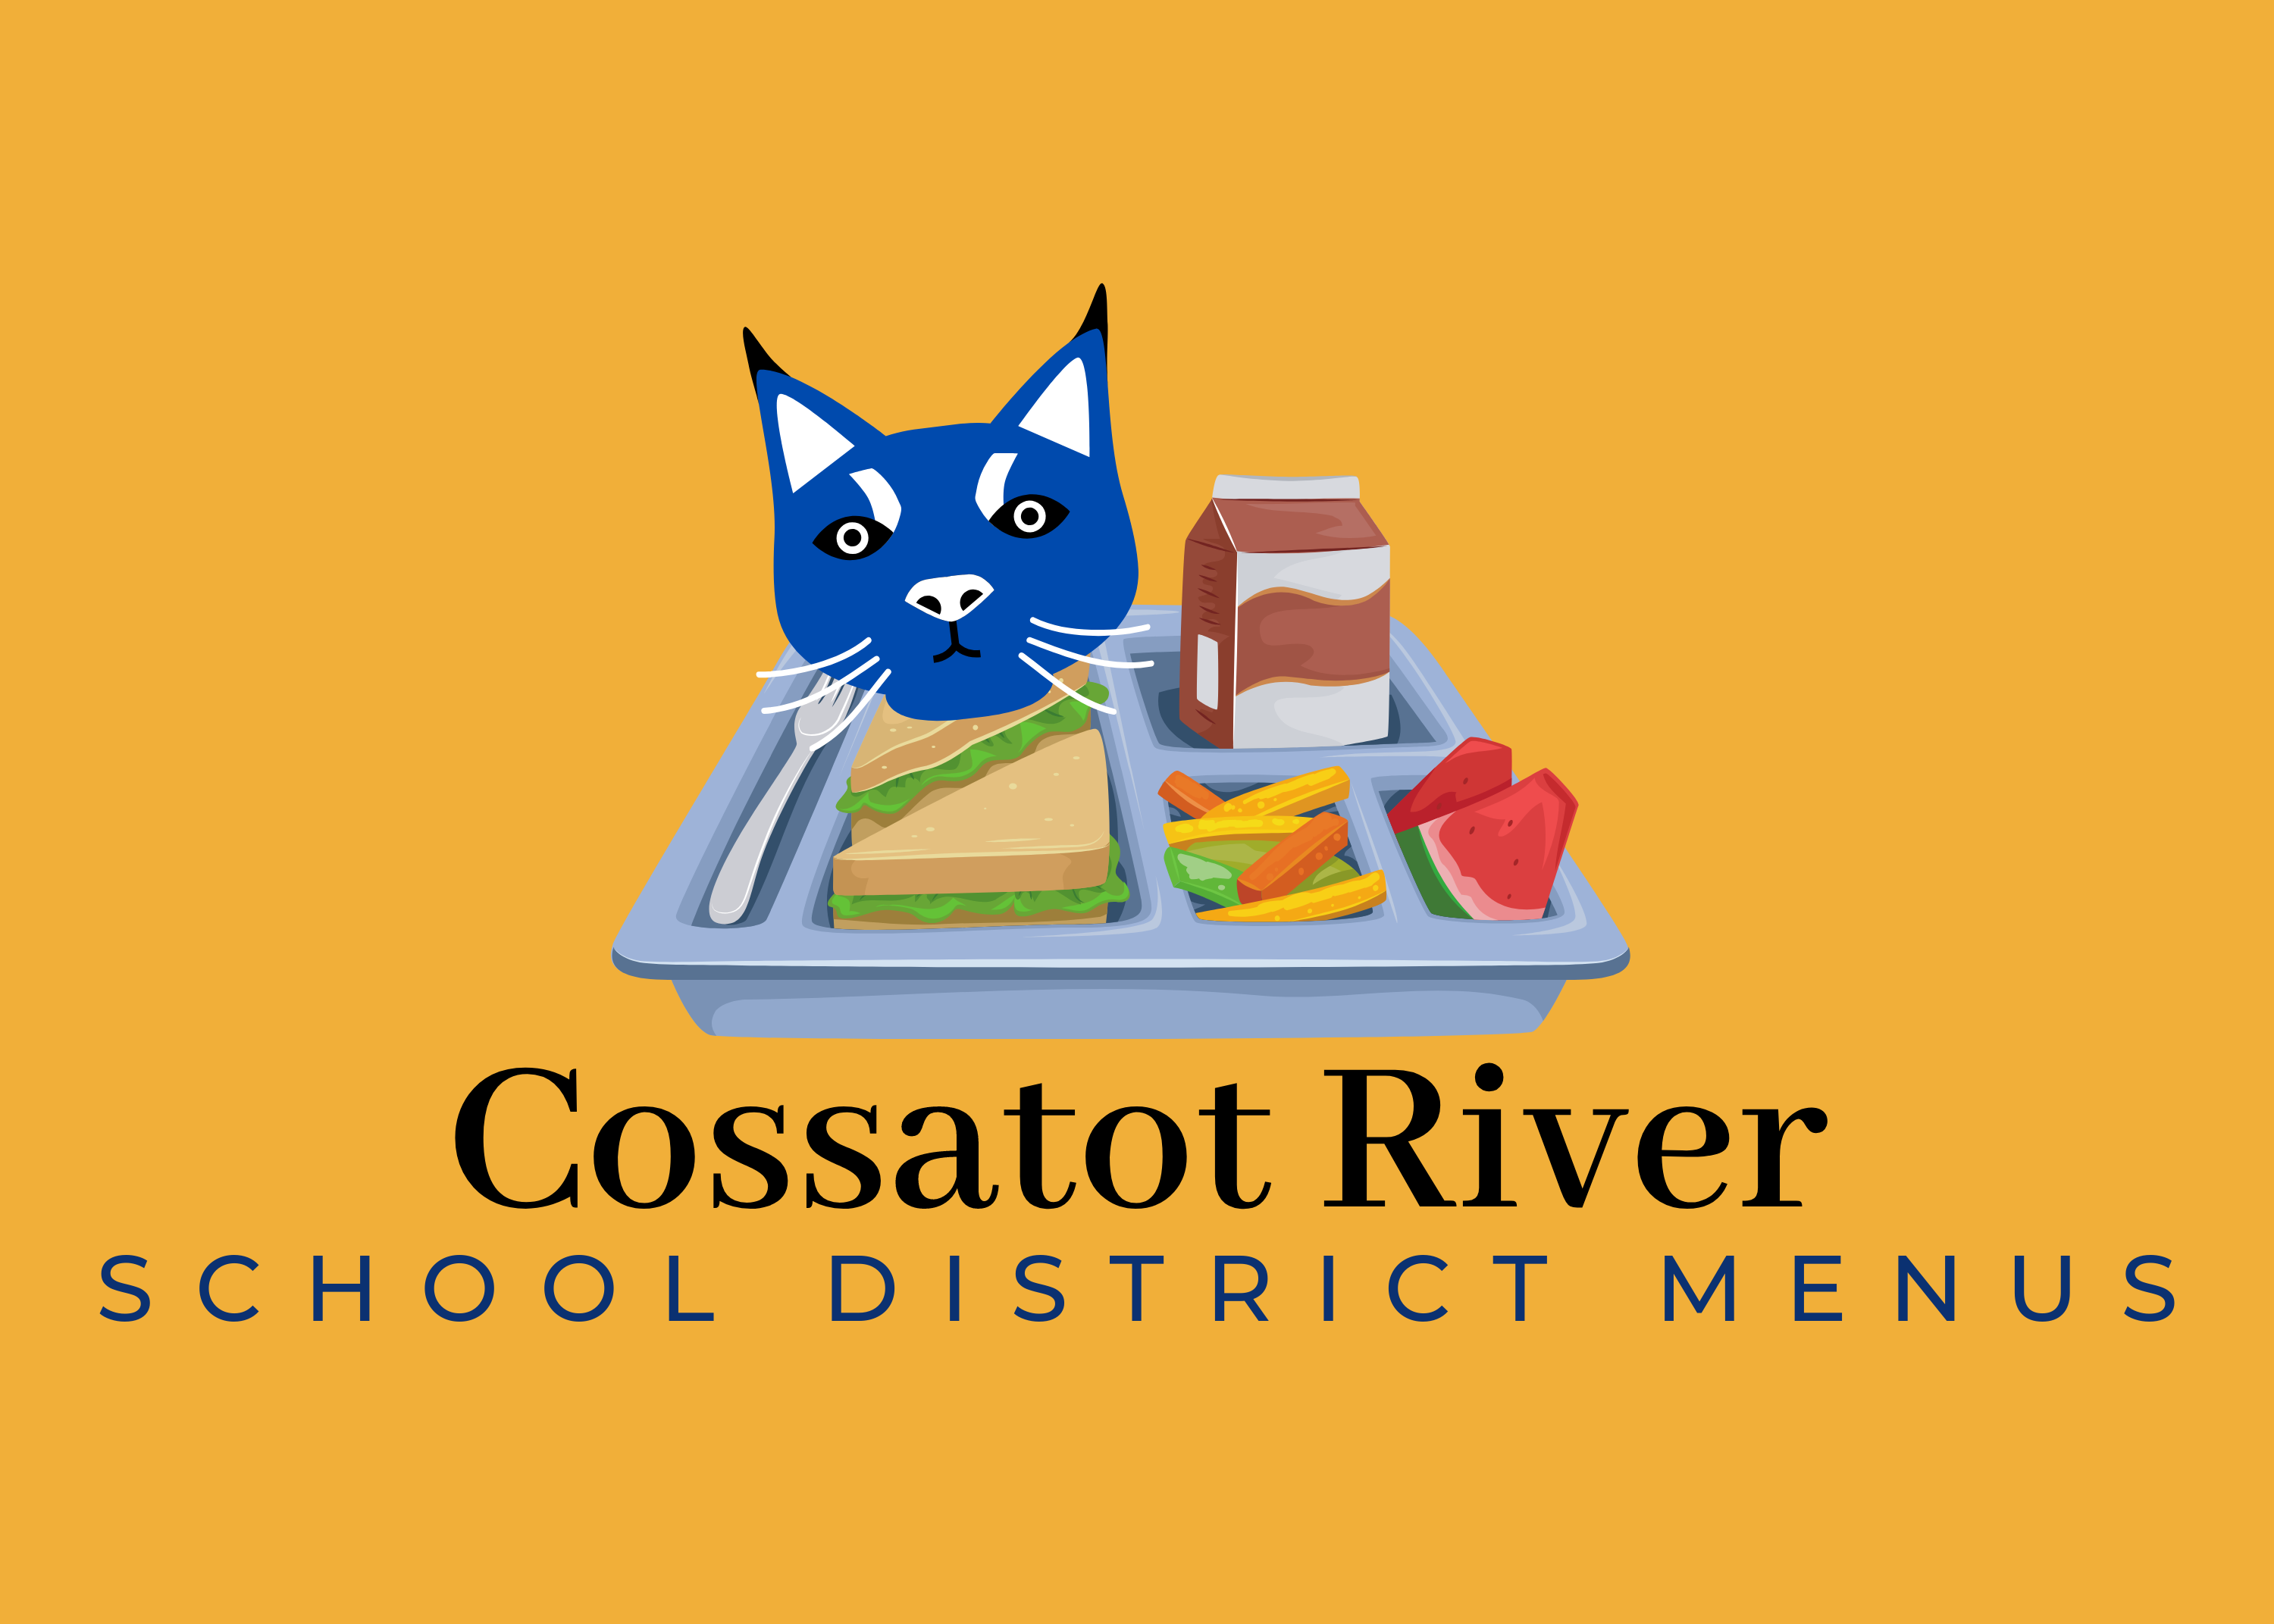 photo of a school lunch that says cossatot river school district menus